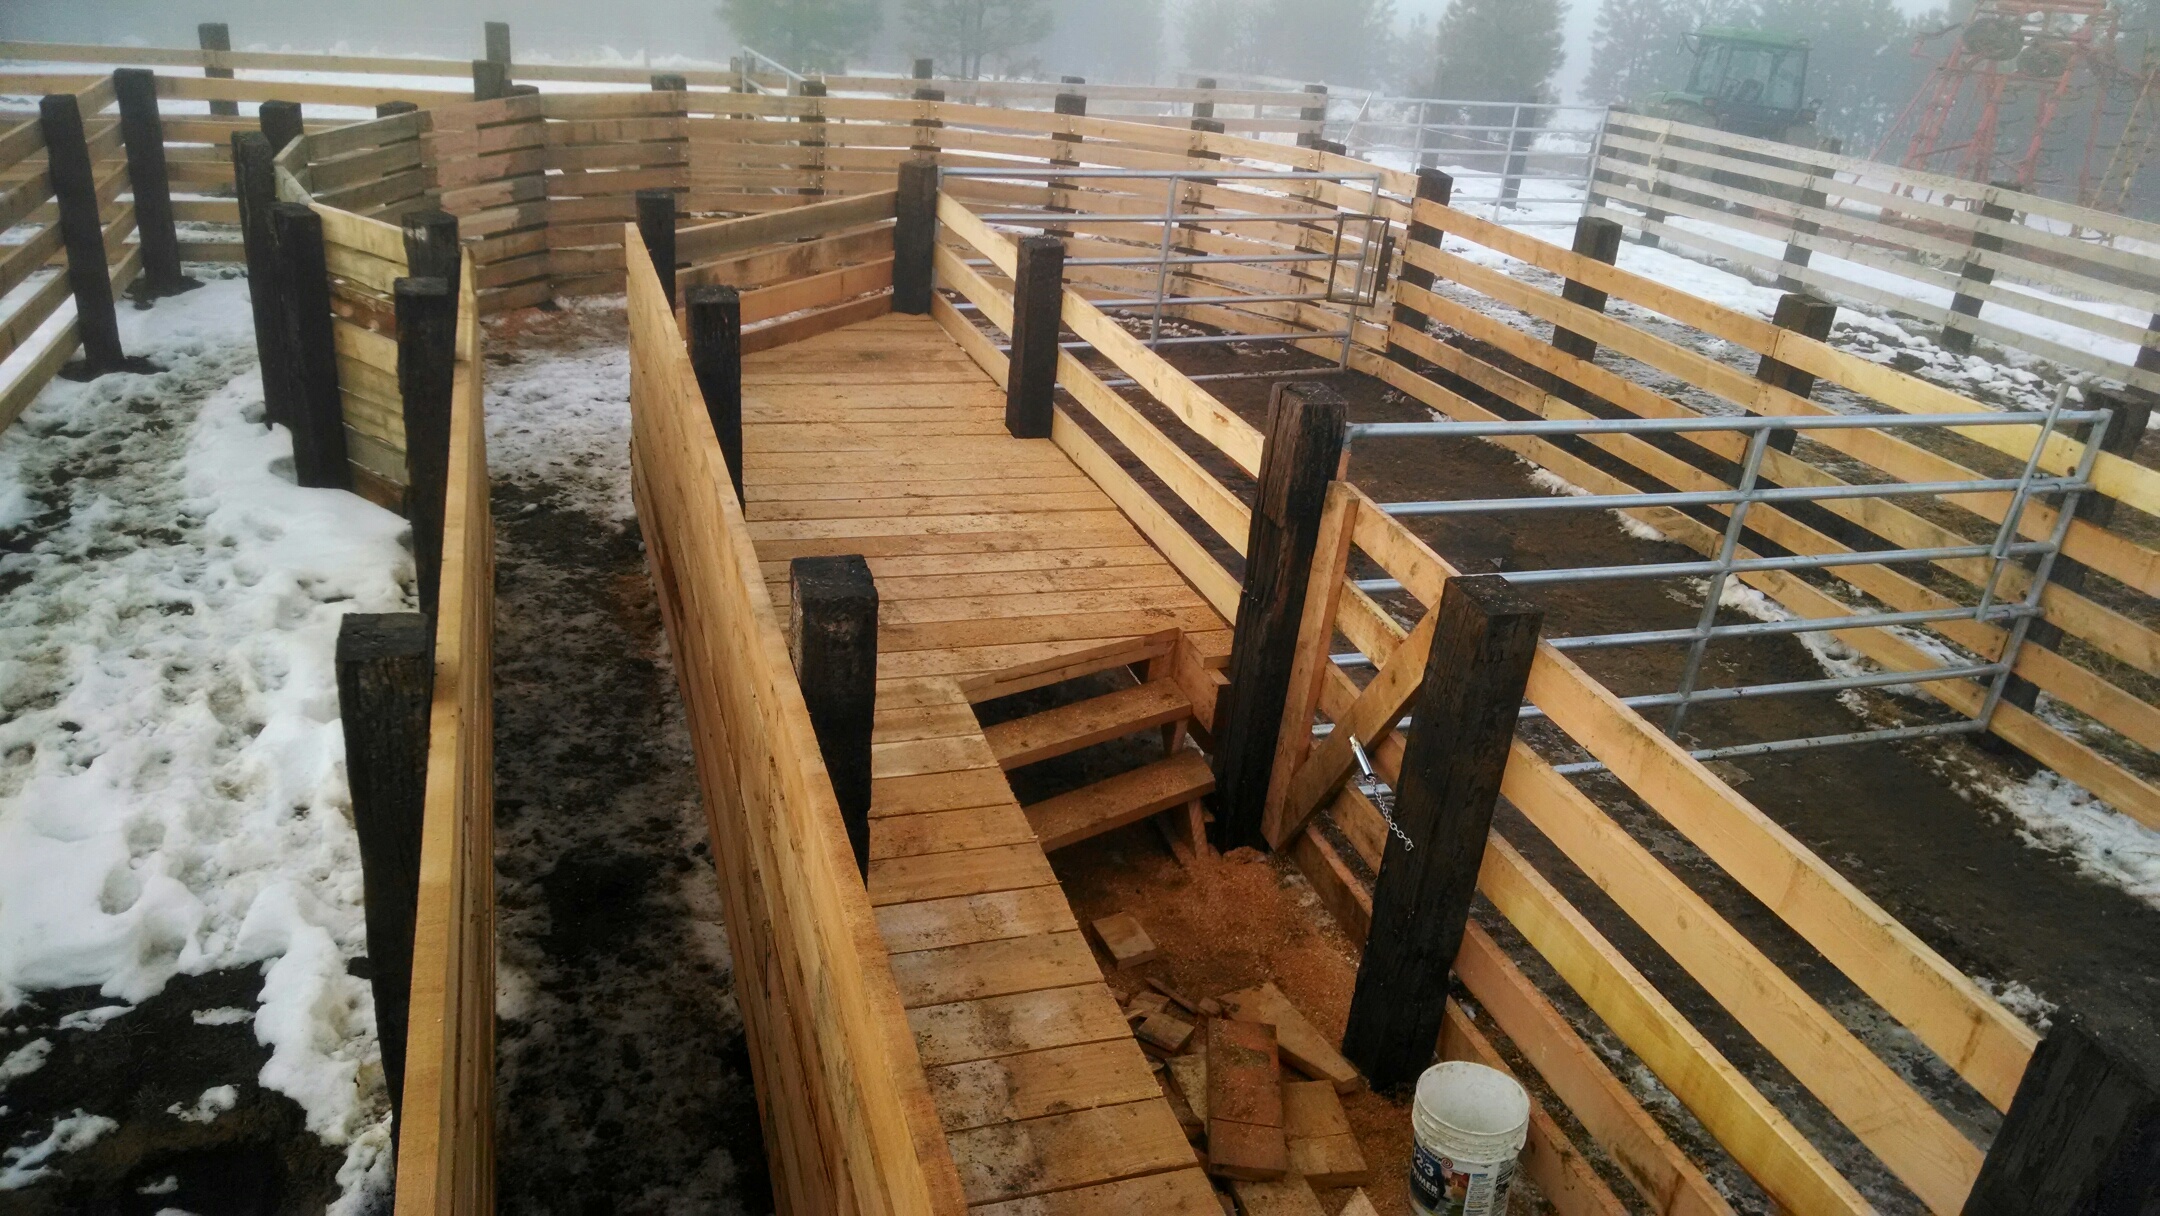 How To Build A Corral For Cattle - Design Talk